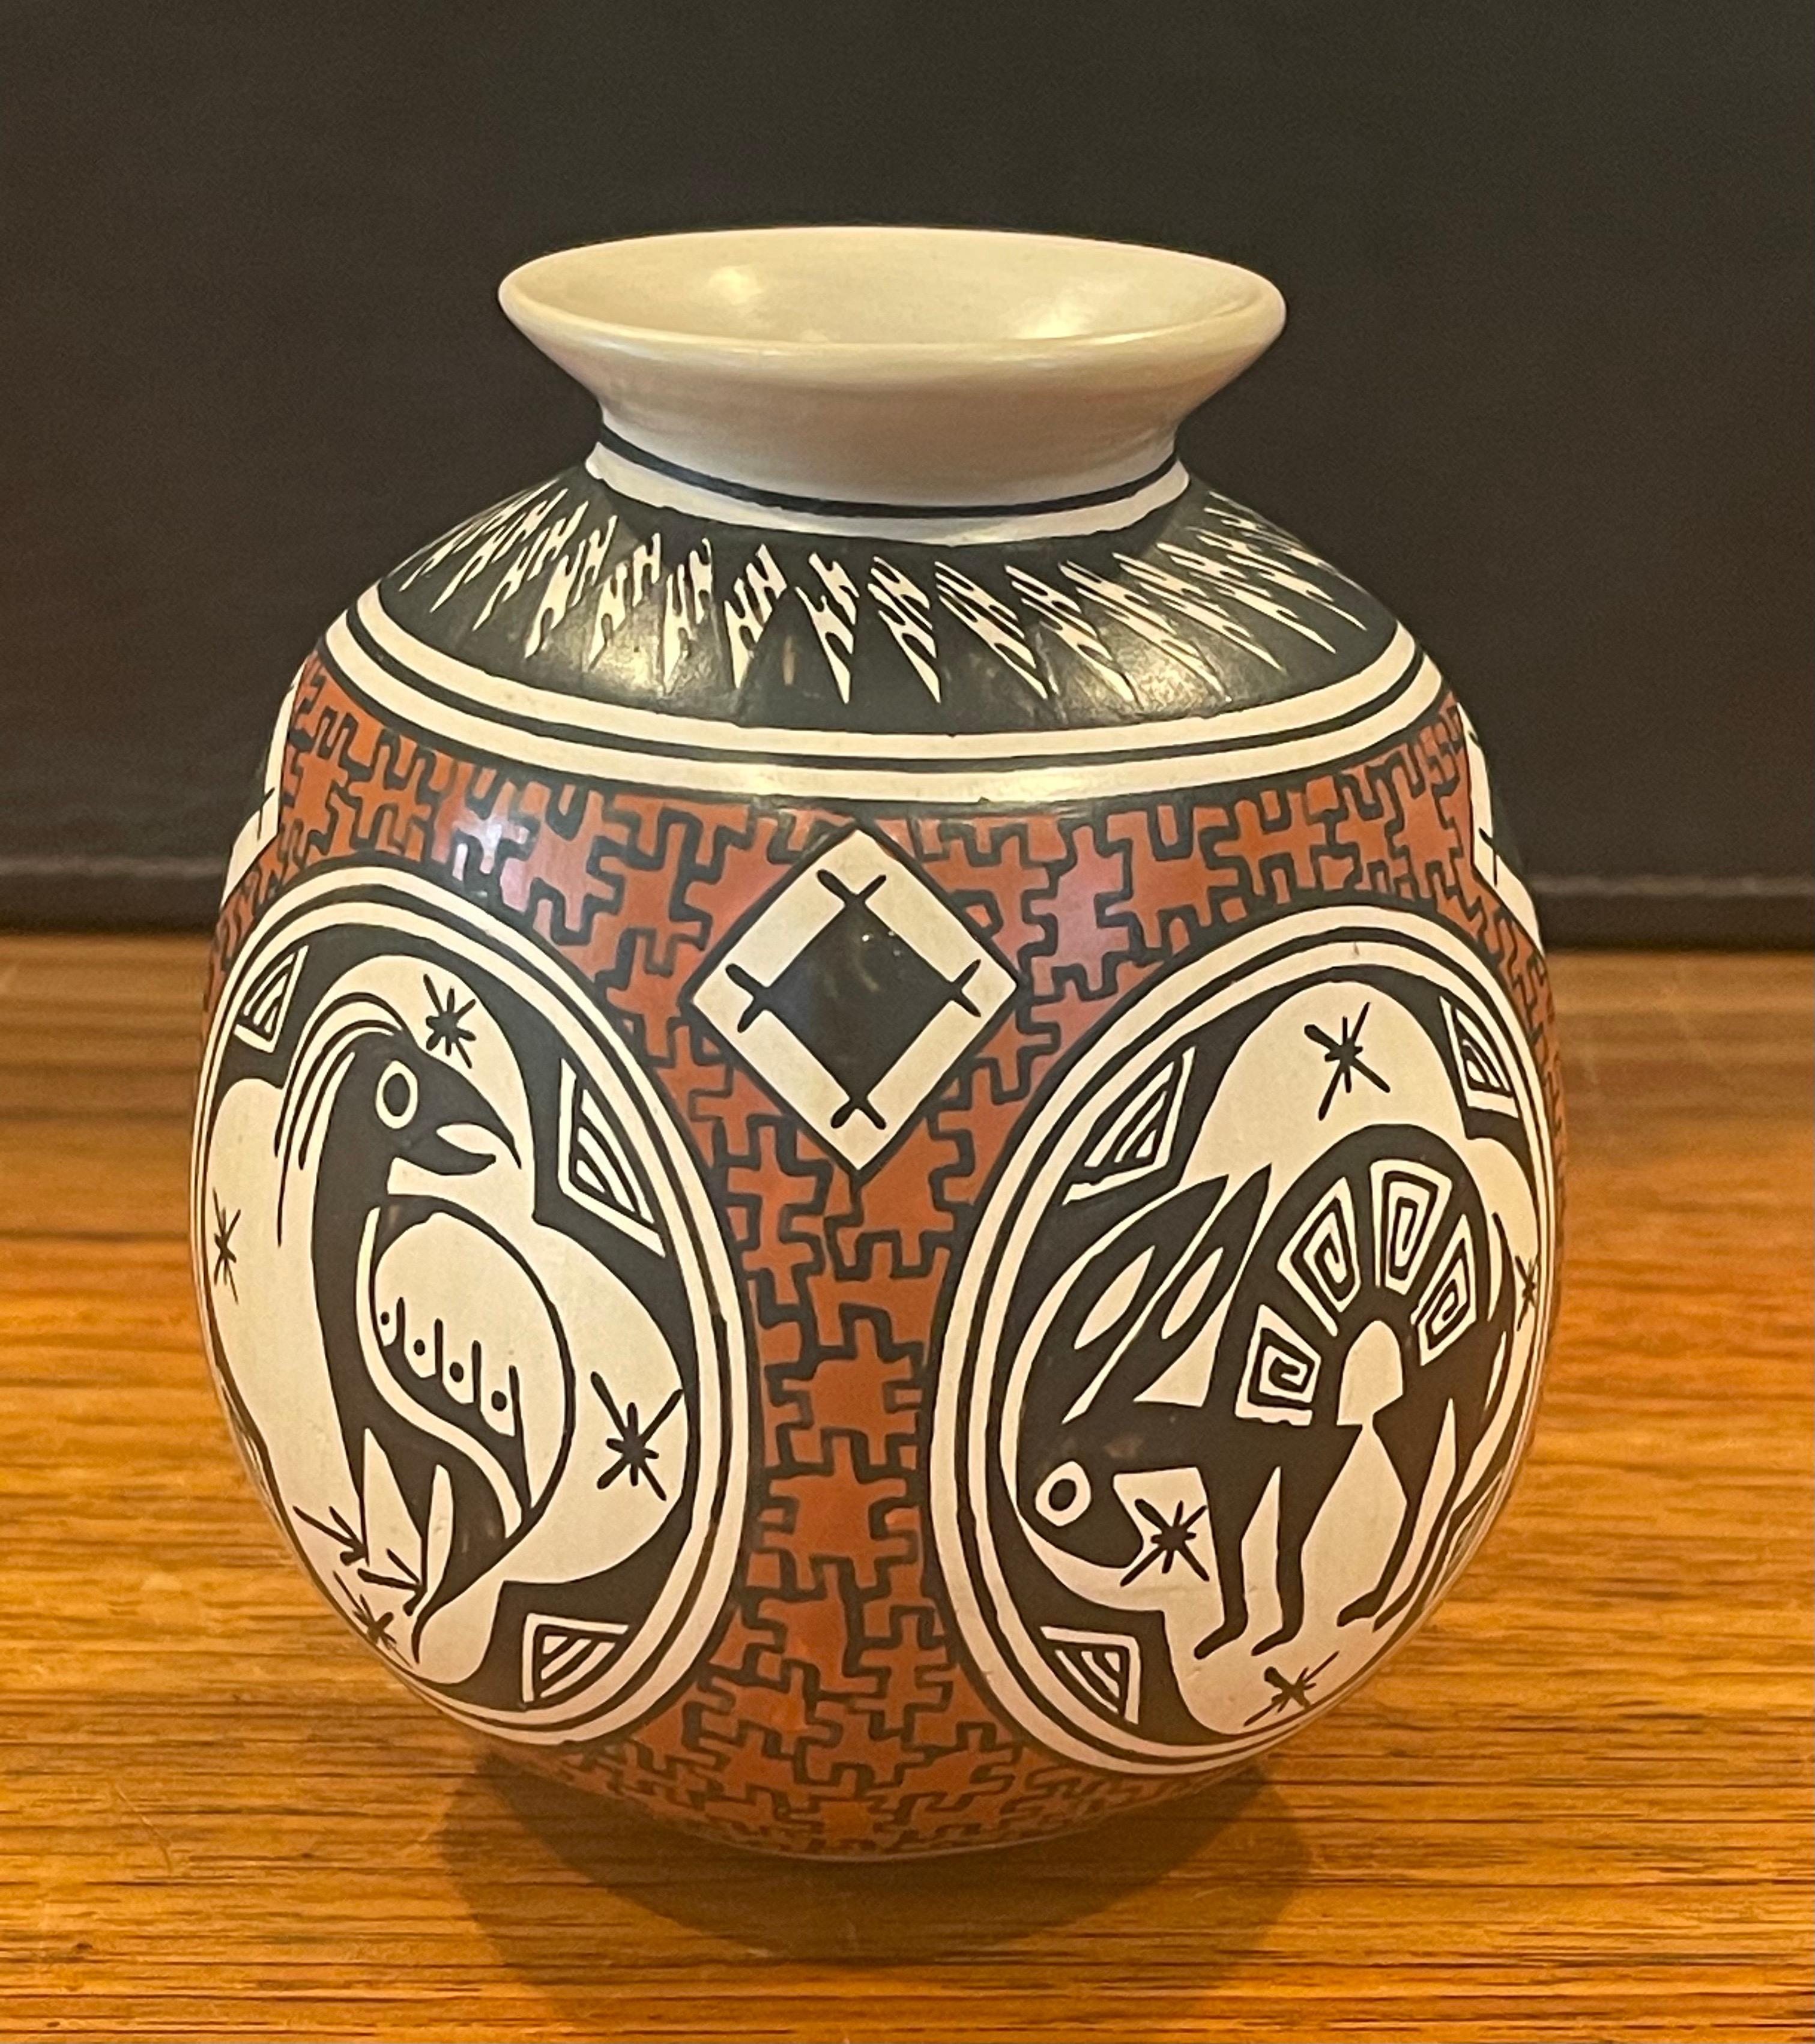 Mata Ortiz Polychrome Pottery Vasel by Nancy Heras de Martinez In Good Condition For Sale In San Diego, CA